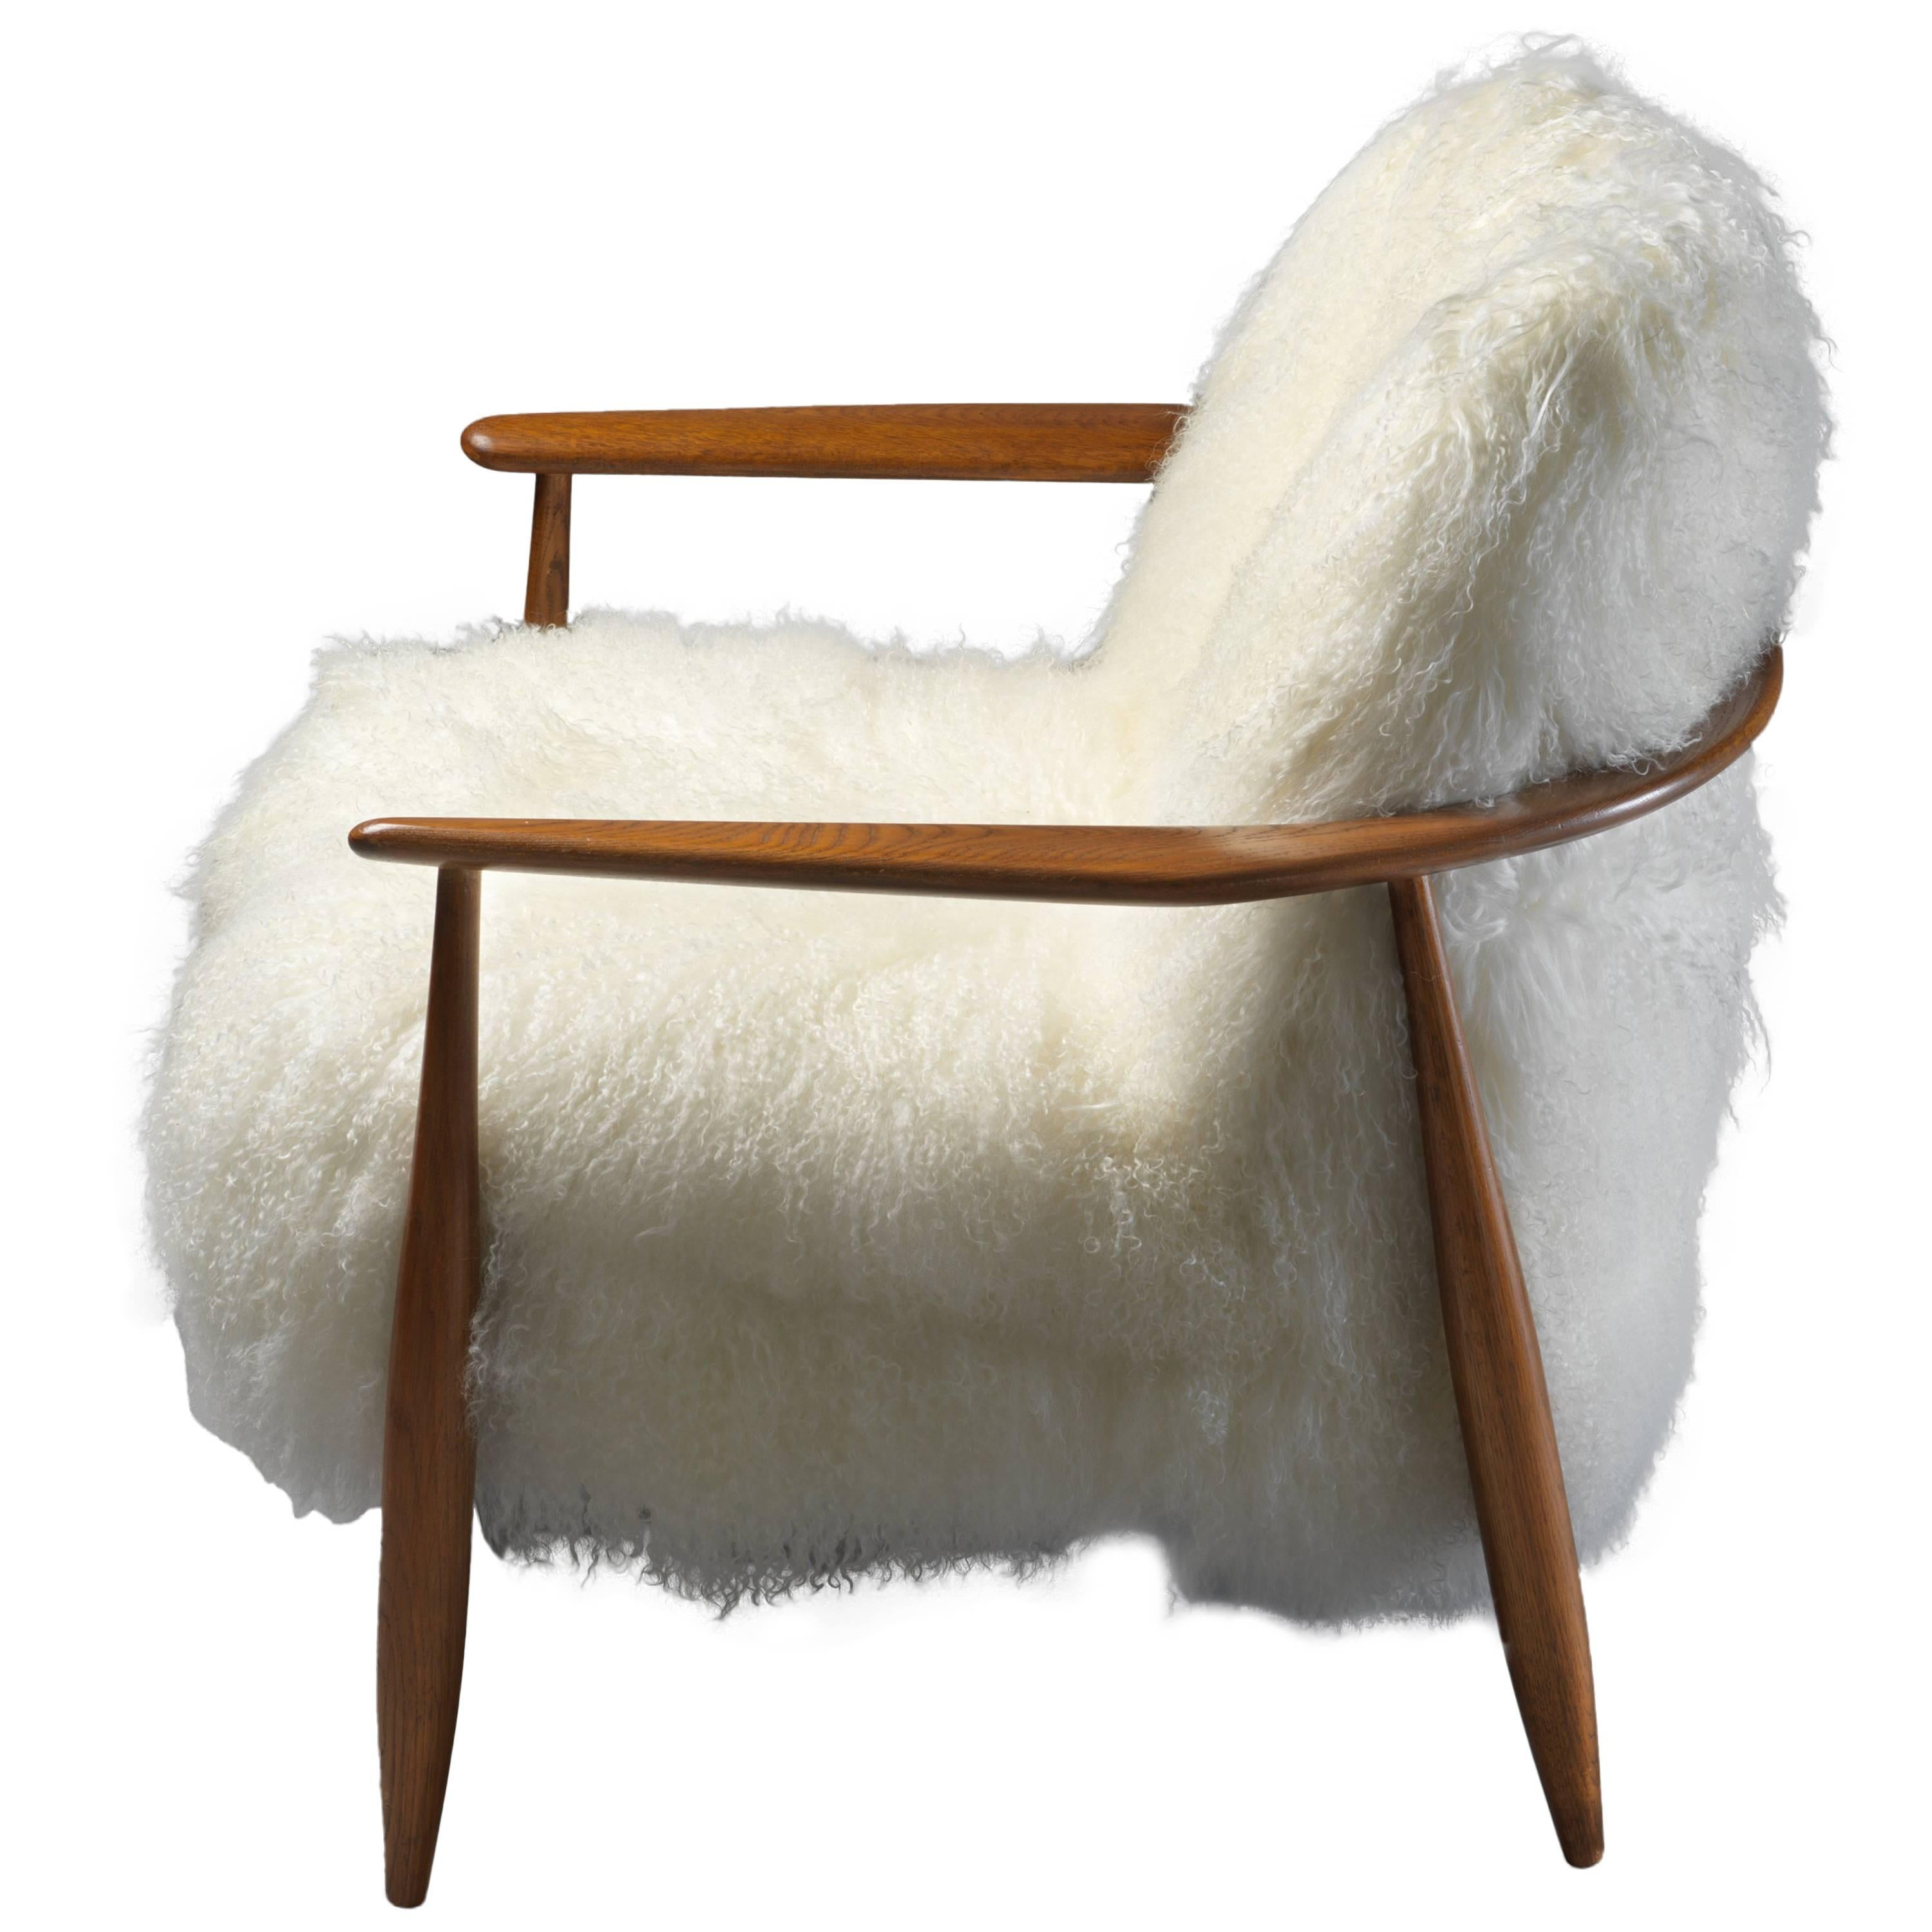 Ib Kofod-Larsen Attributed, Lounge Chair in White Lambskin, Stained Oak, 1950s